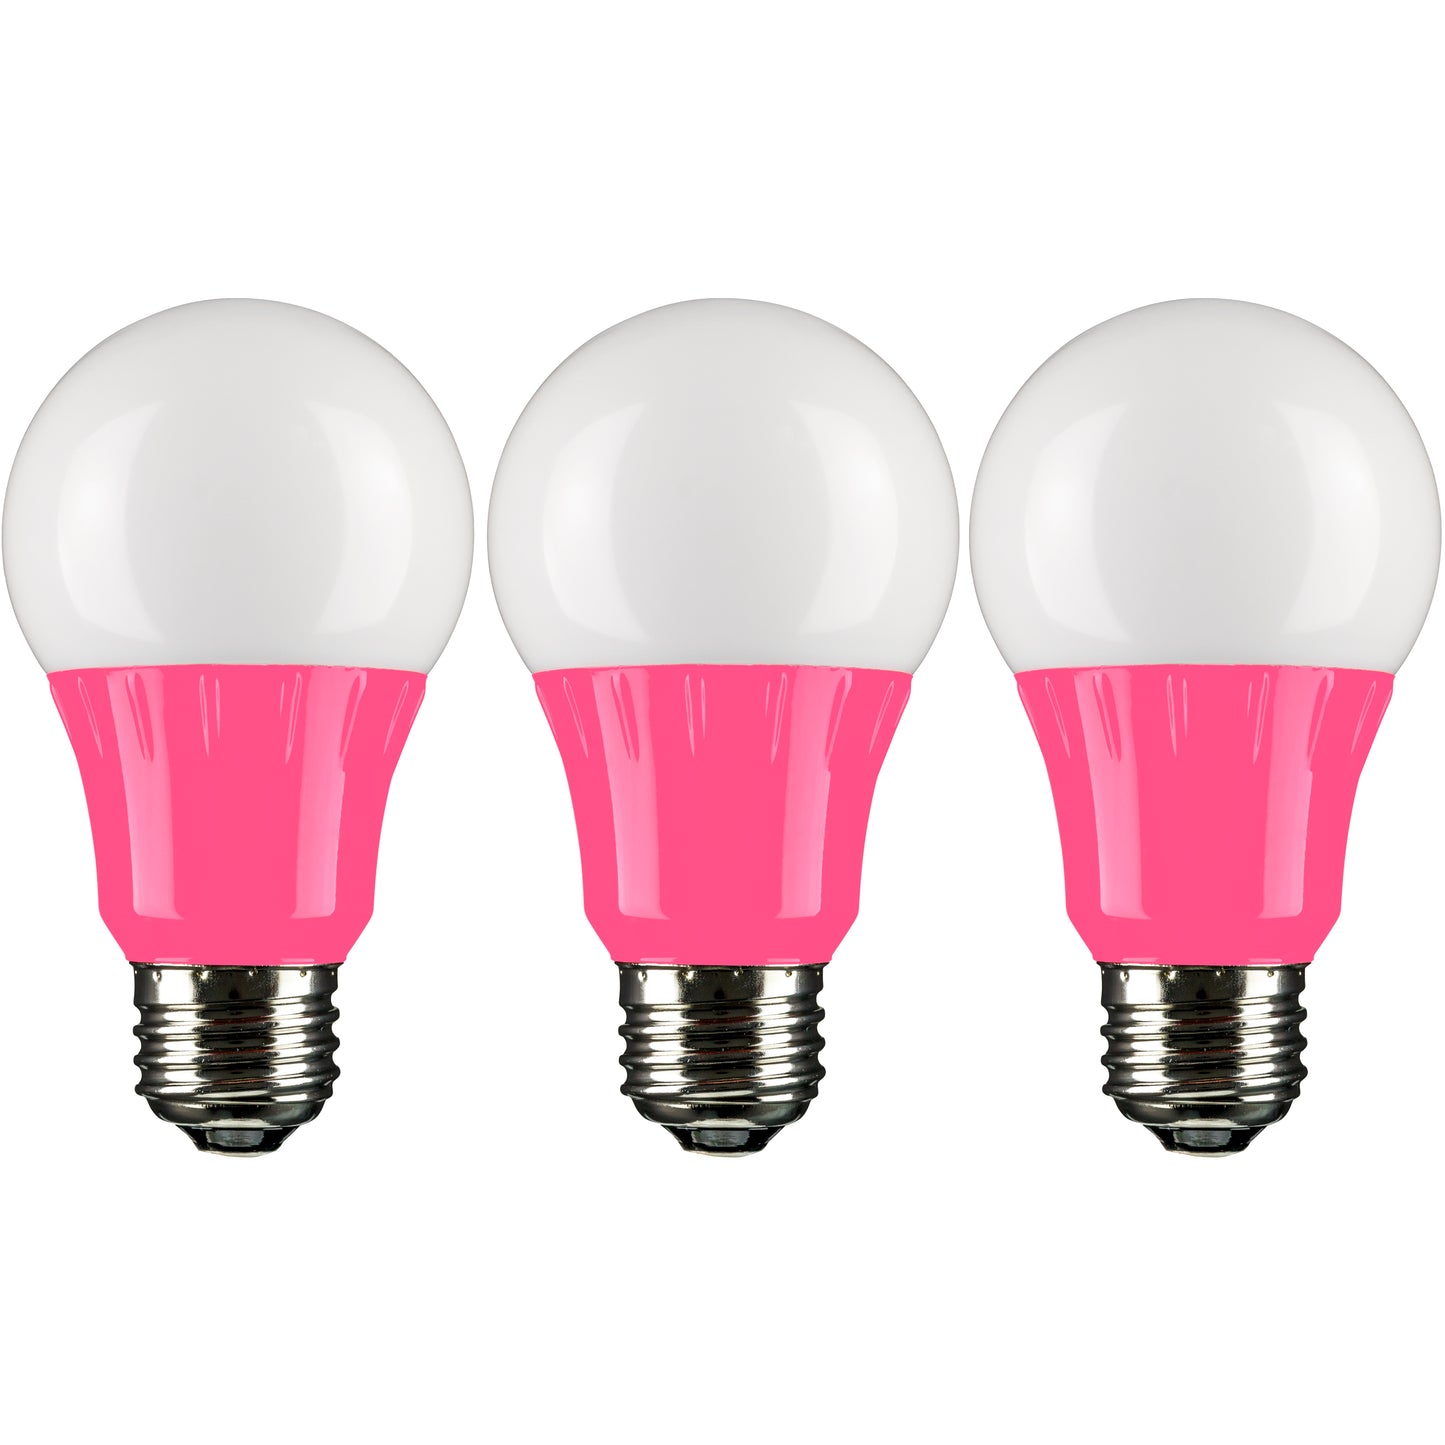 Sunlite 40453-SU LED A19 Colored Light Bulb, 3 Watts (25w Equivalent), E26 Medium Base, Non-Dimmable, UL Listed, Pink 3 Pack